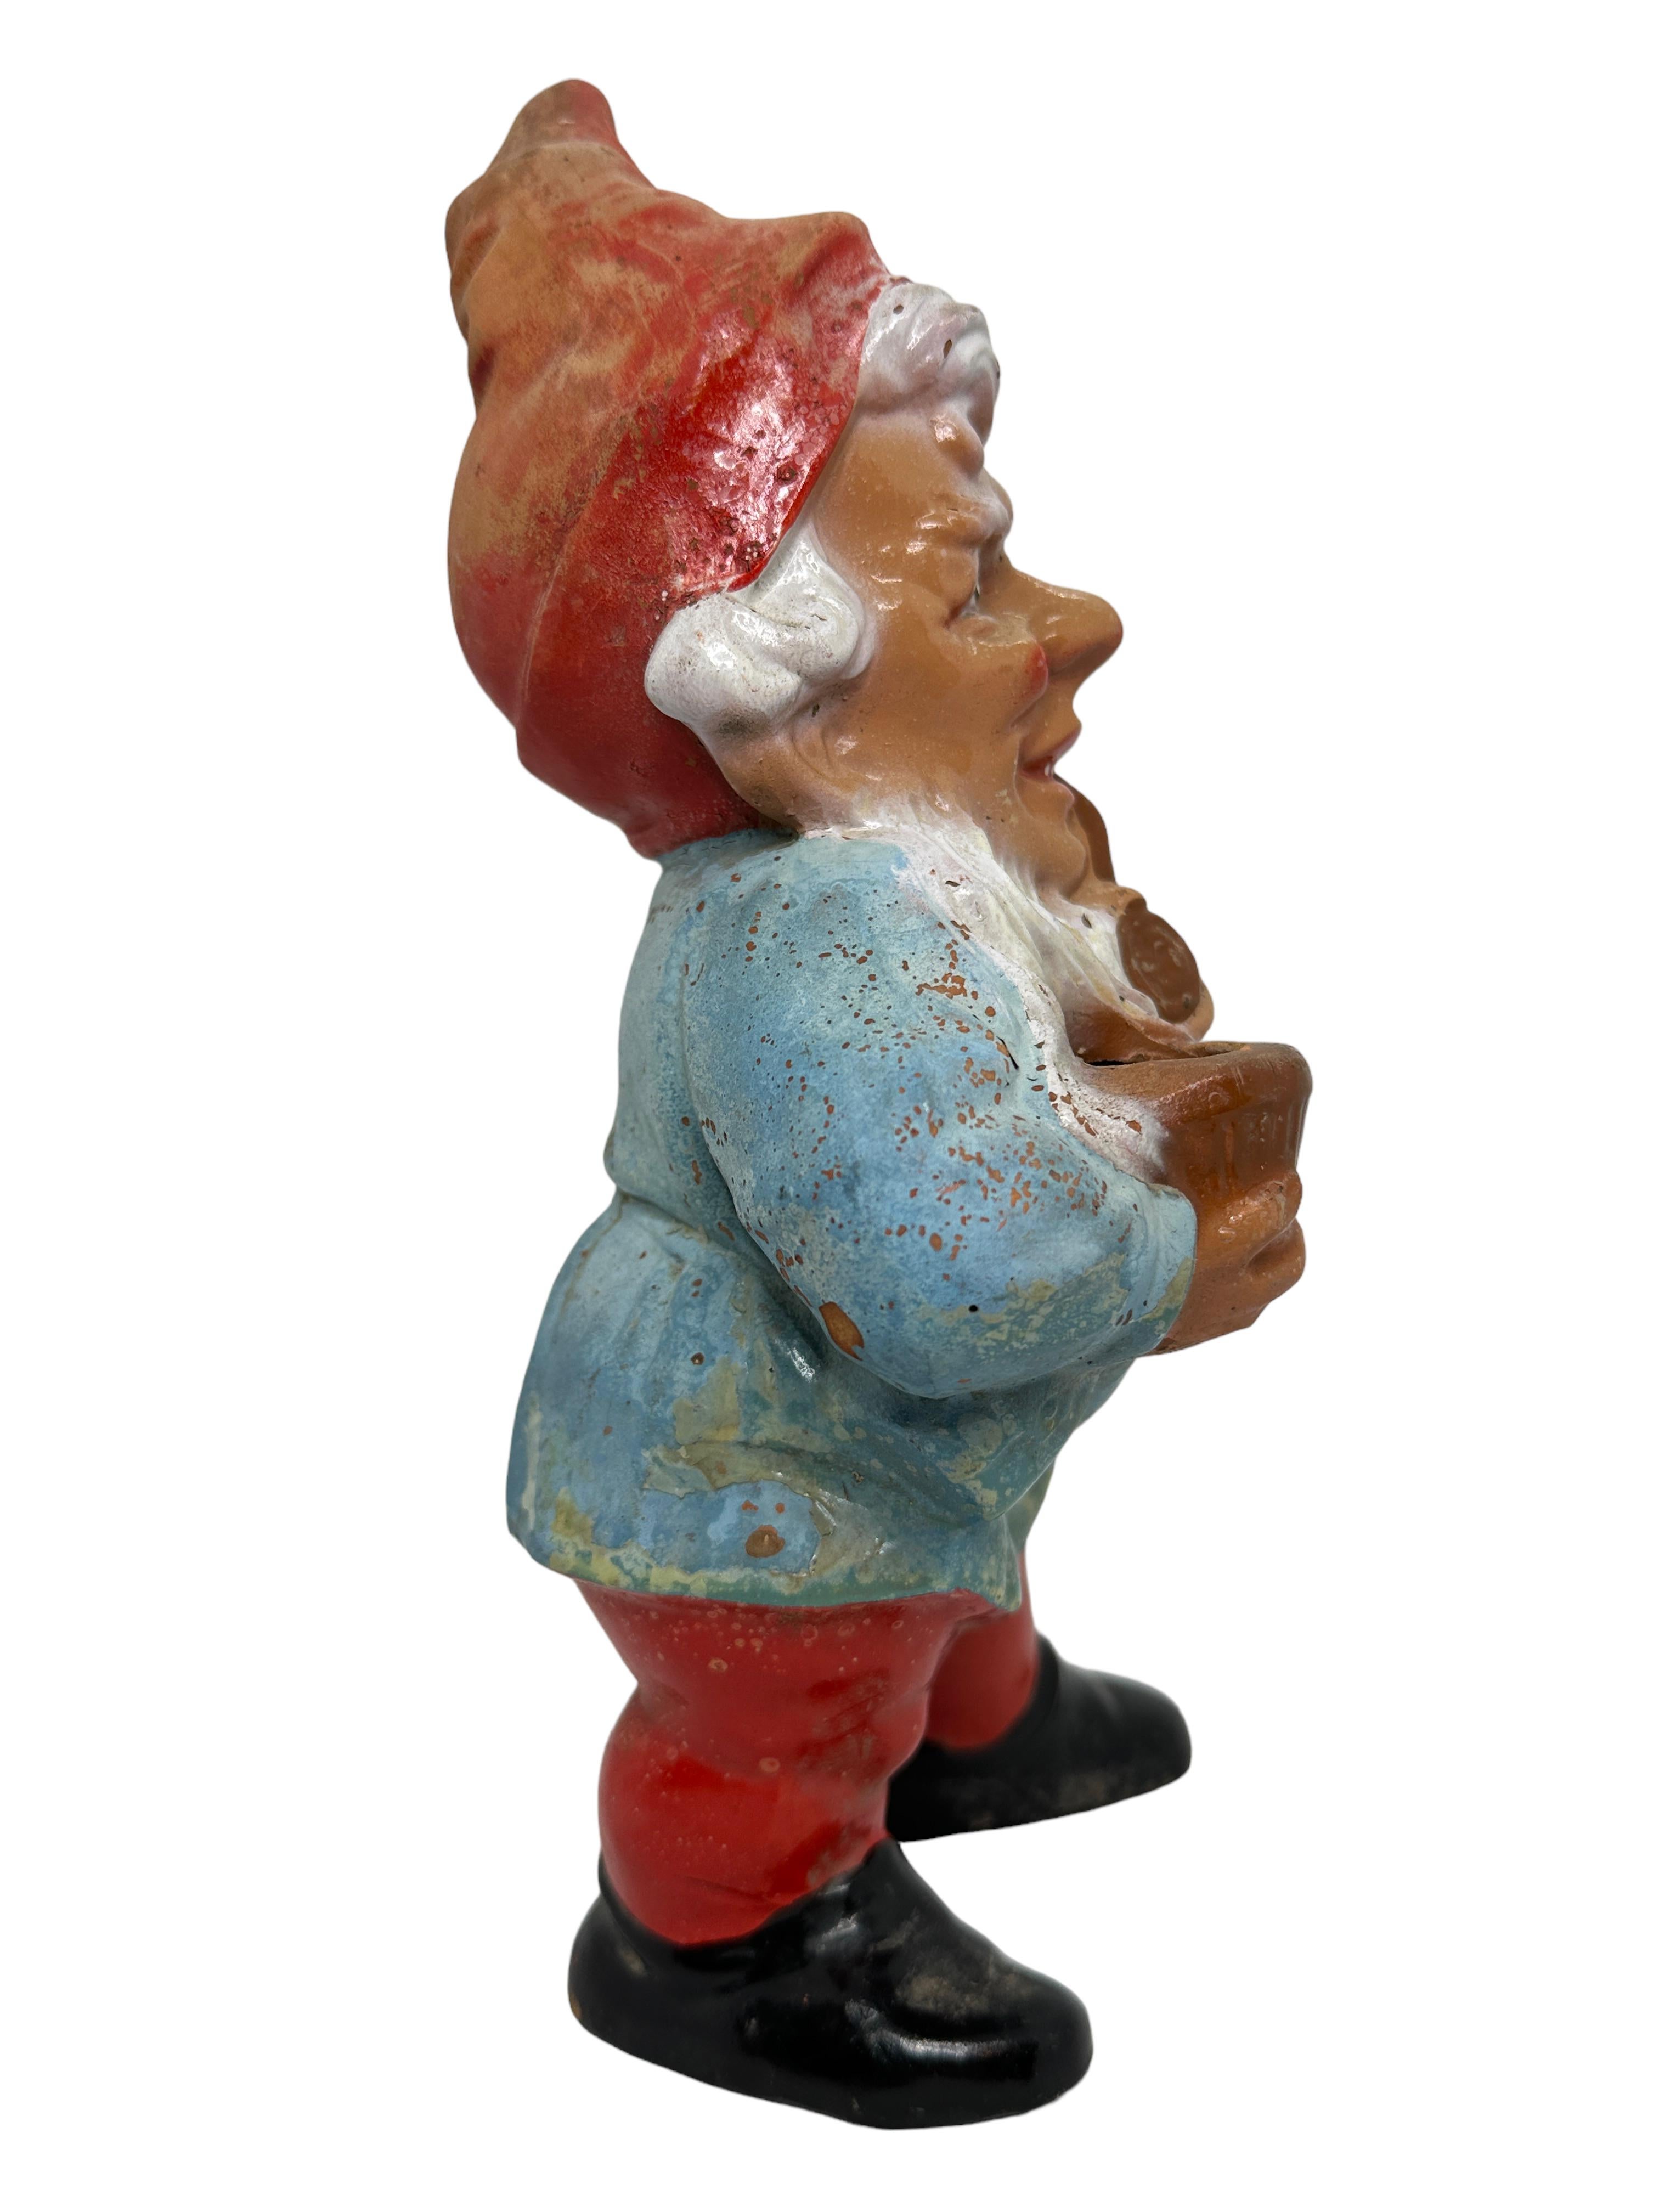 Hand-Painted Pipe Smoking Vintage German Yard or Garden Gnome Statue, 1930s